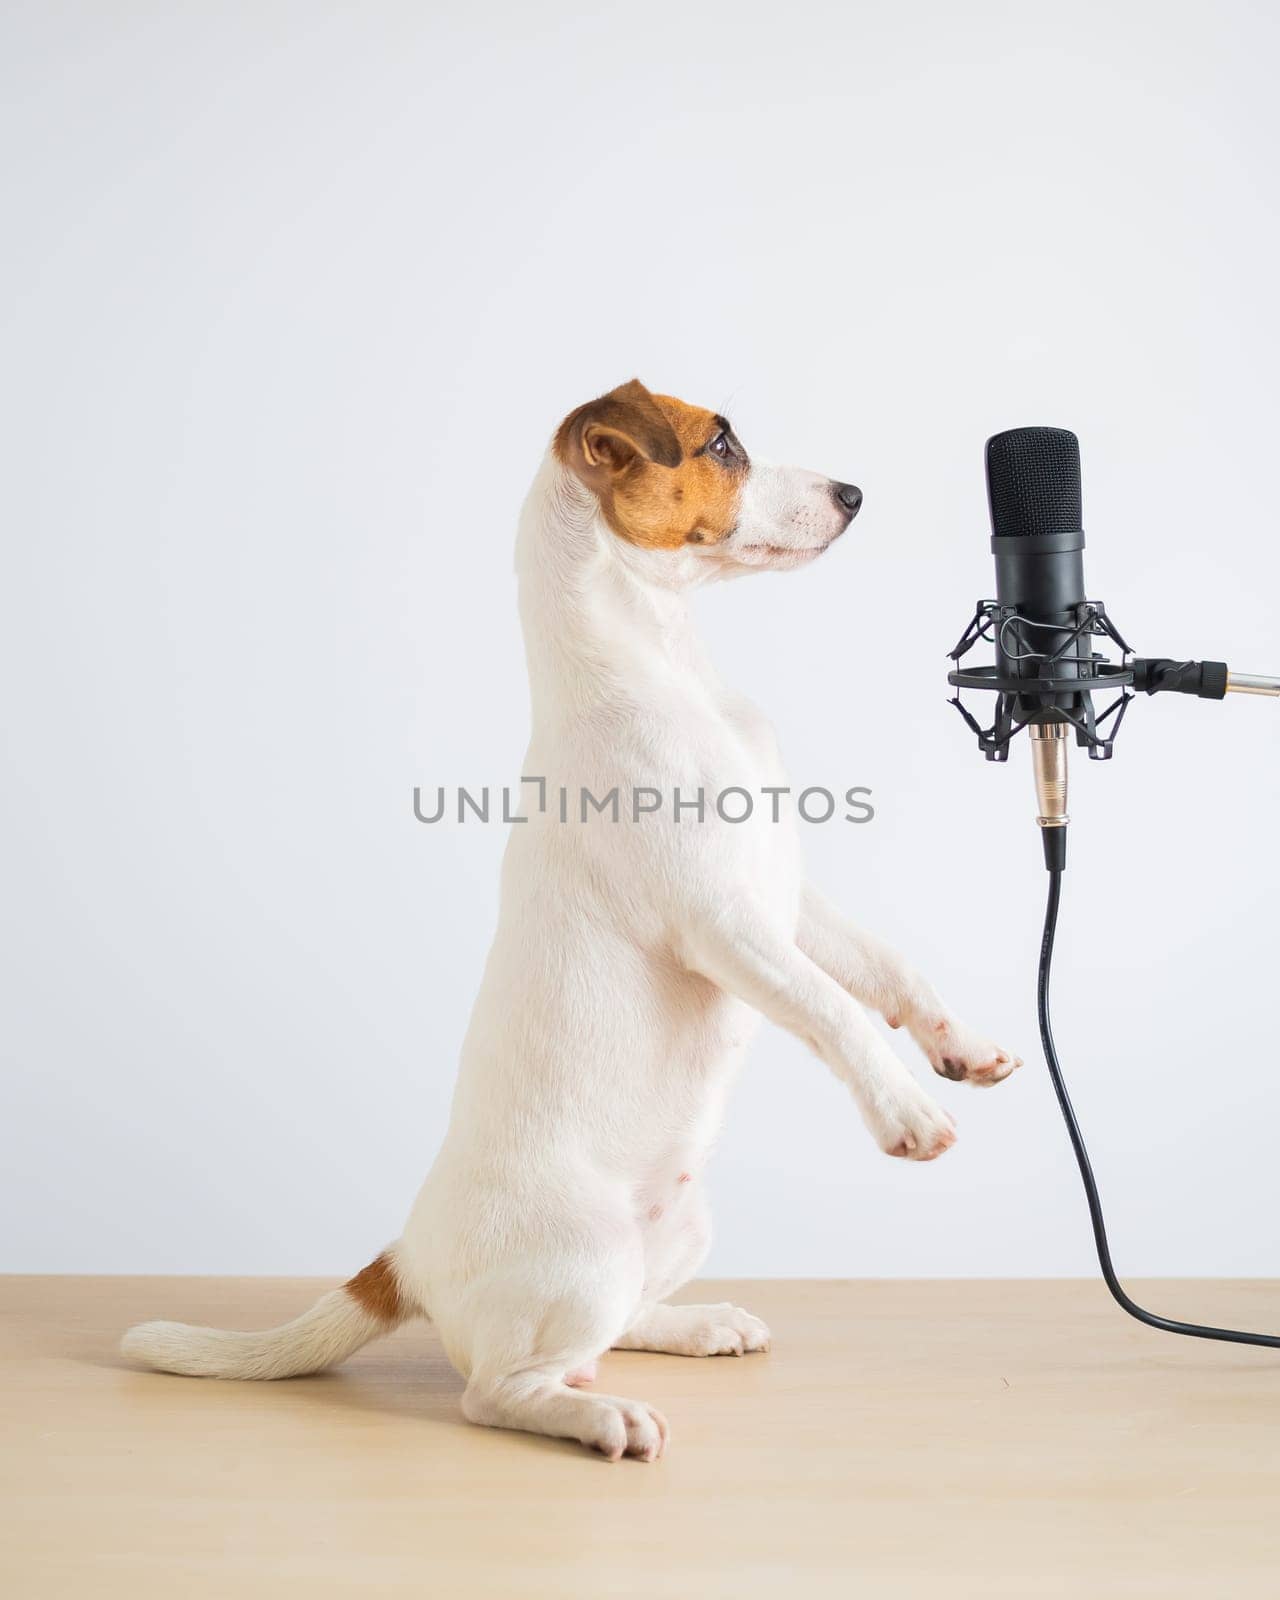 Jack russell terrier dog stands on its hind legs in a pose to serve at the microphone and is broadcasting on a white background by mrwed54